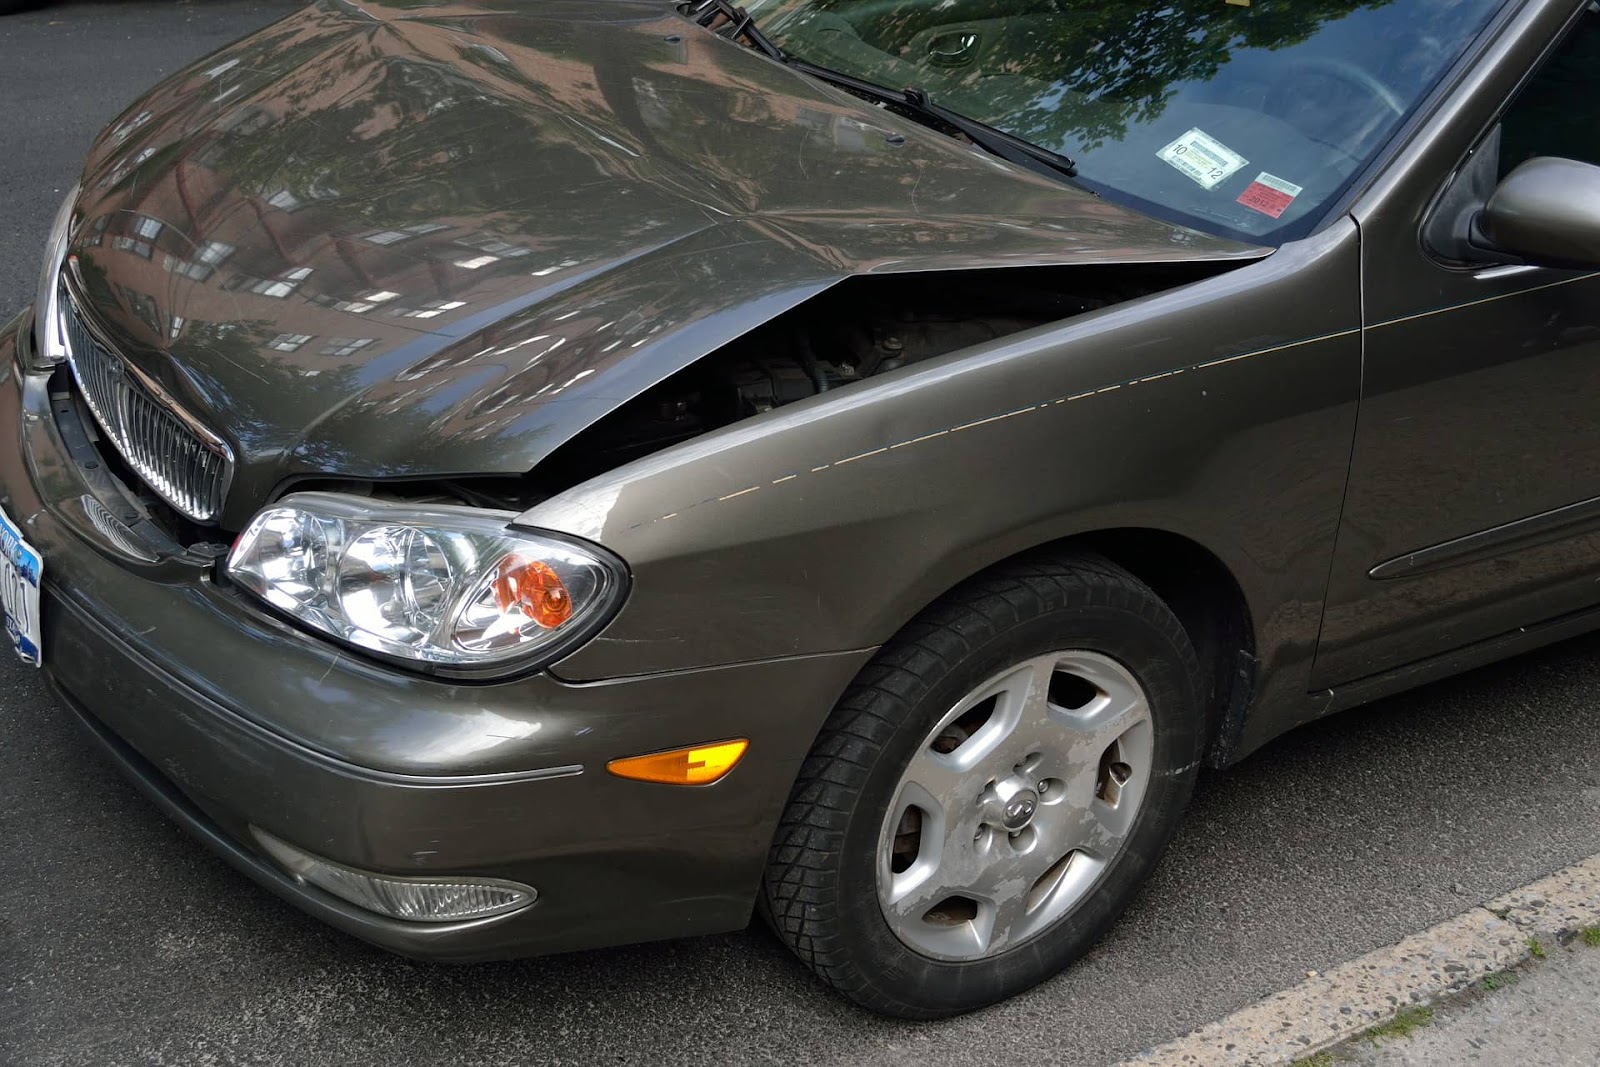 The front end of a car with a damaged fender and hood